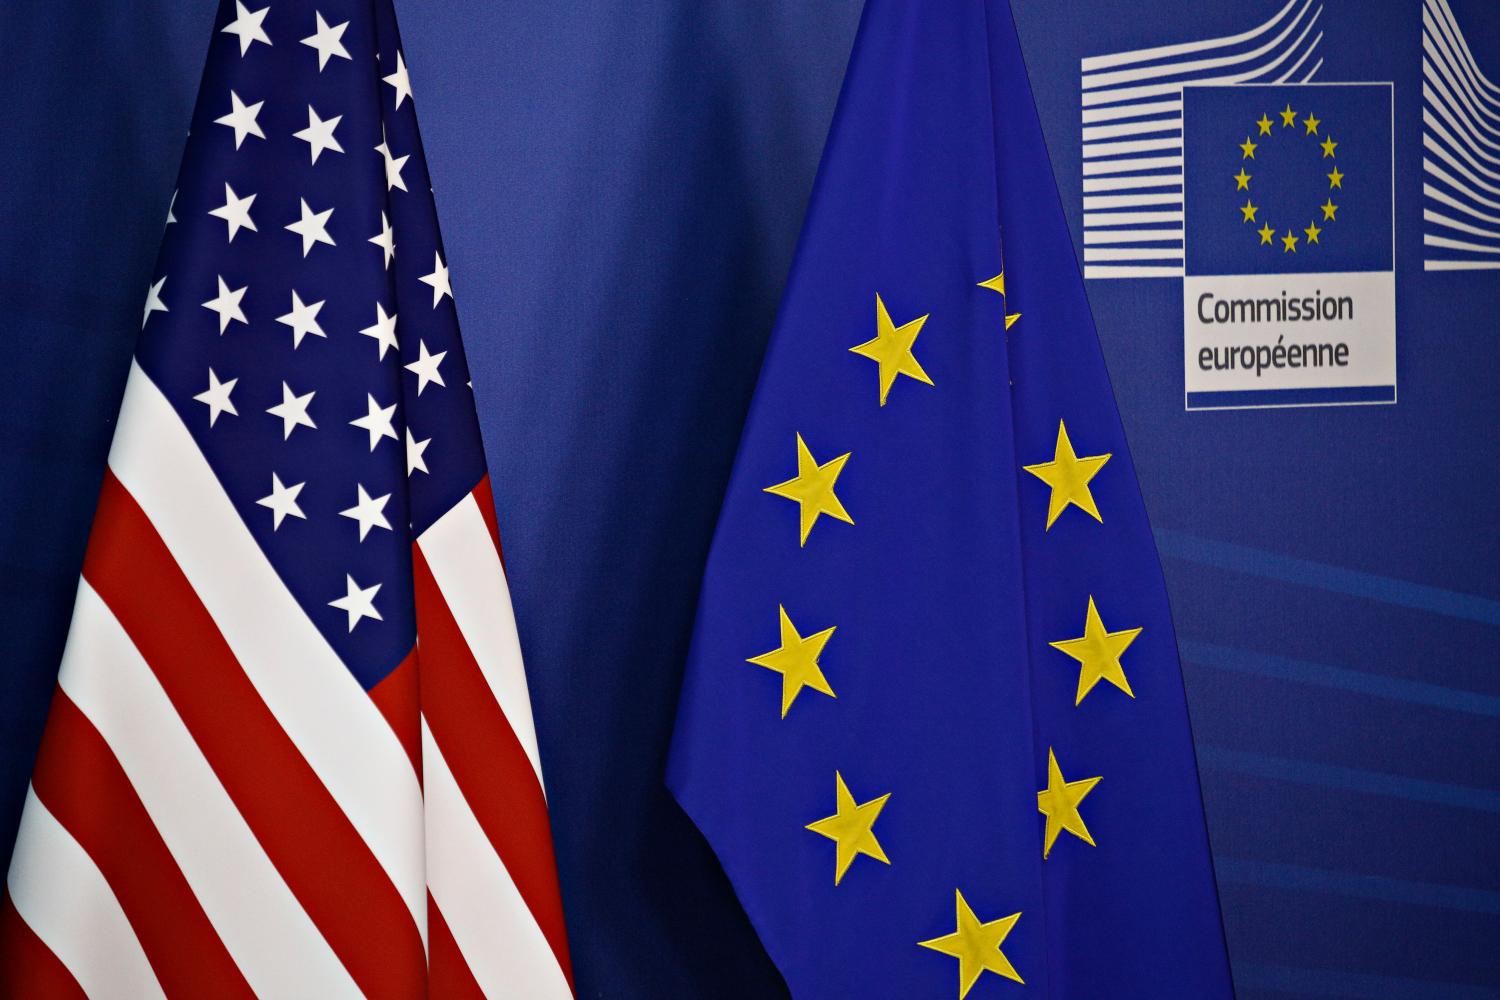 Flags for the European Union and United States.